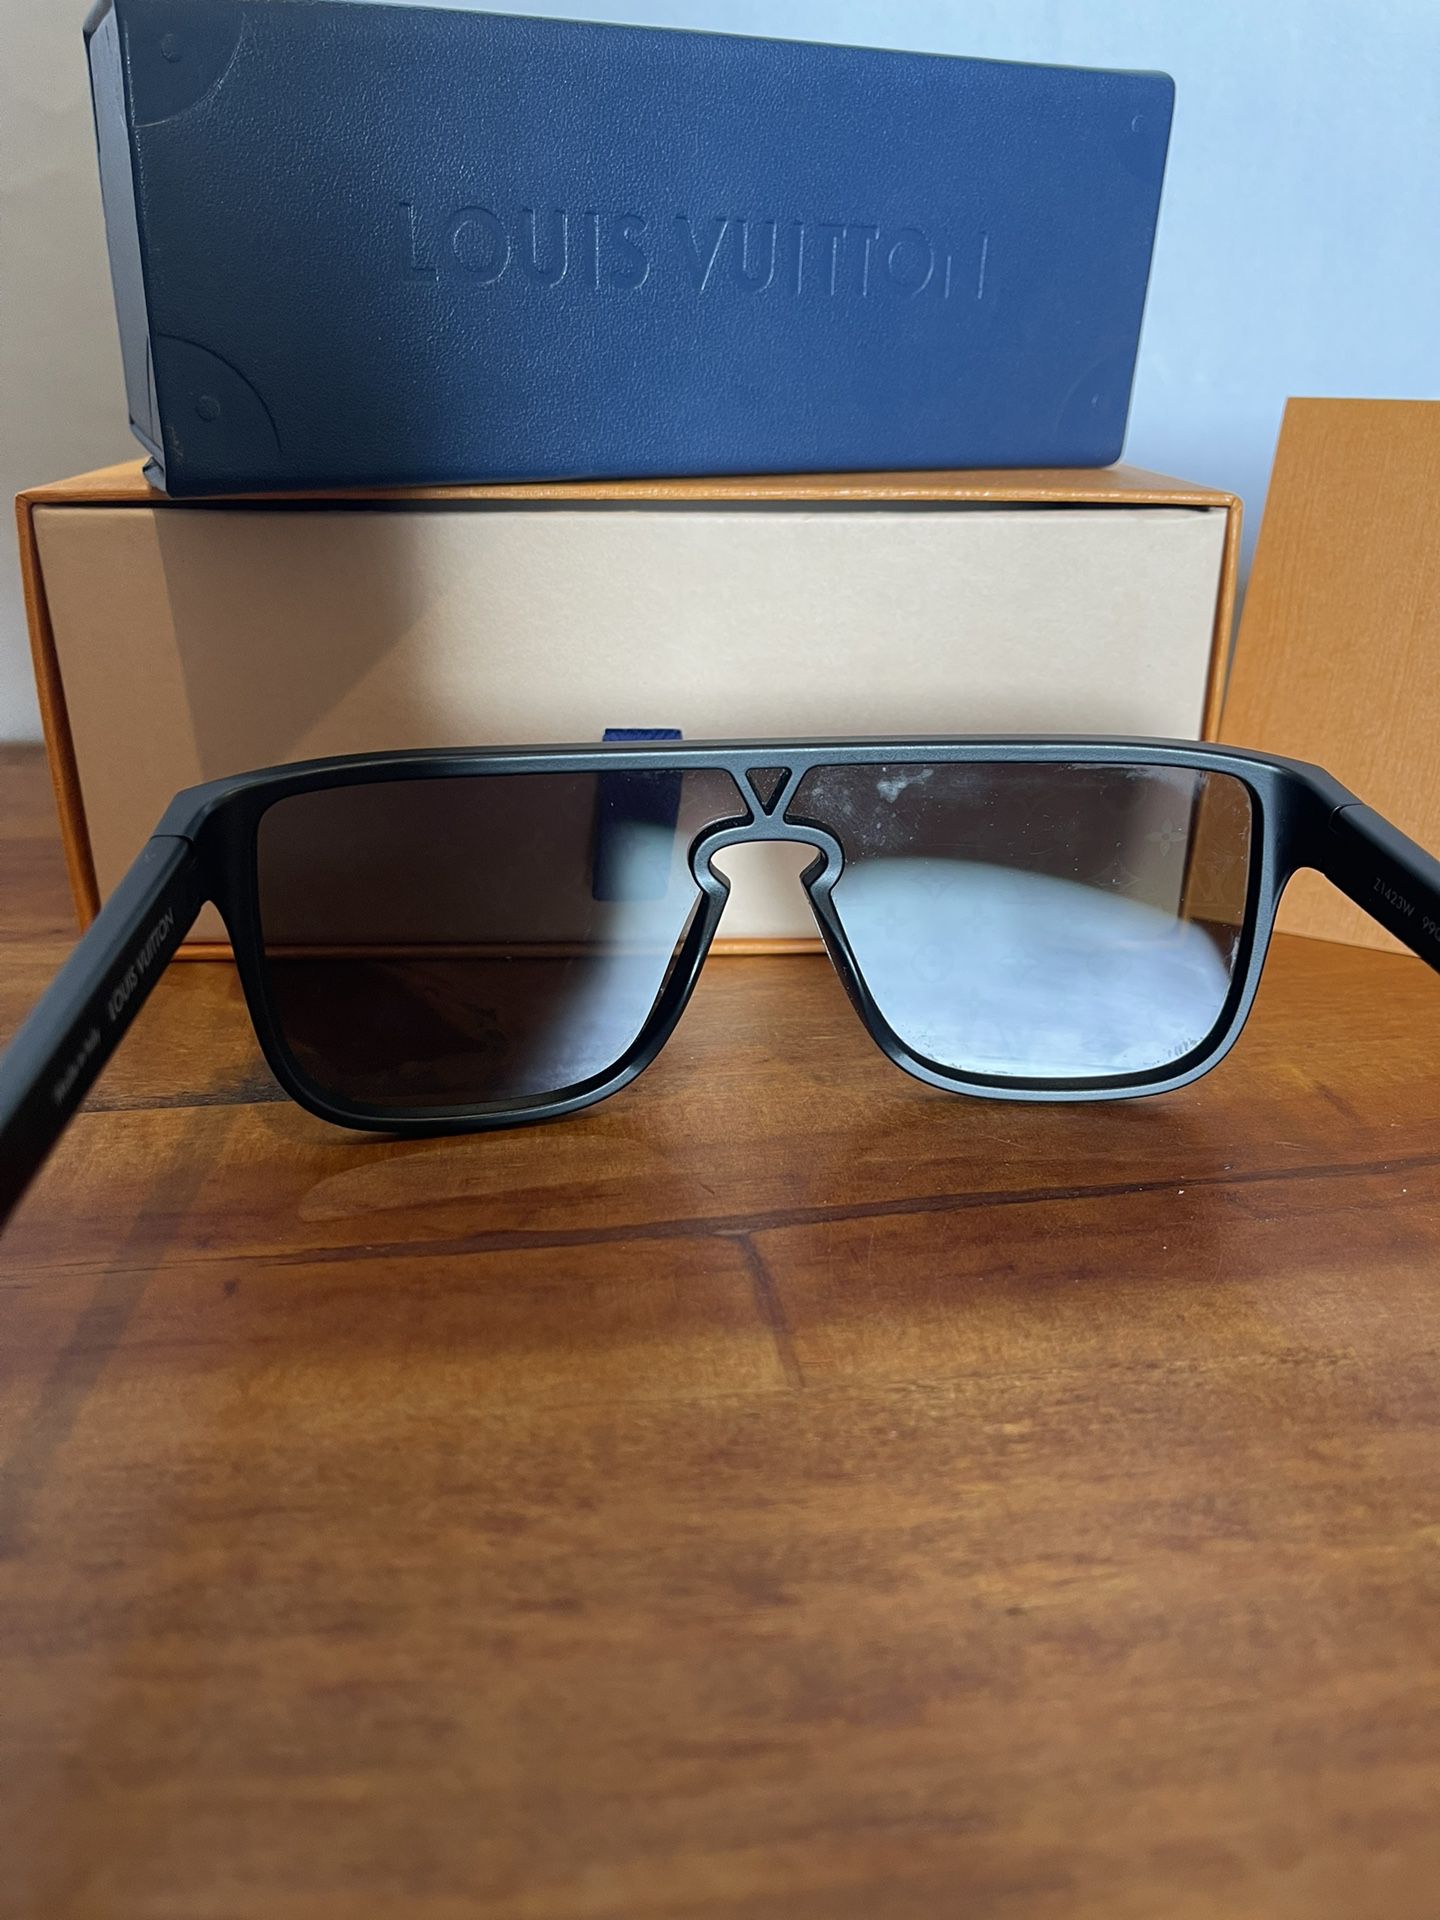 Louis Vuitton Rainbow Square Sunglasses for Sale in Johnstown, CO